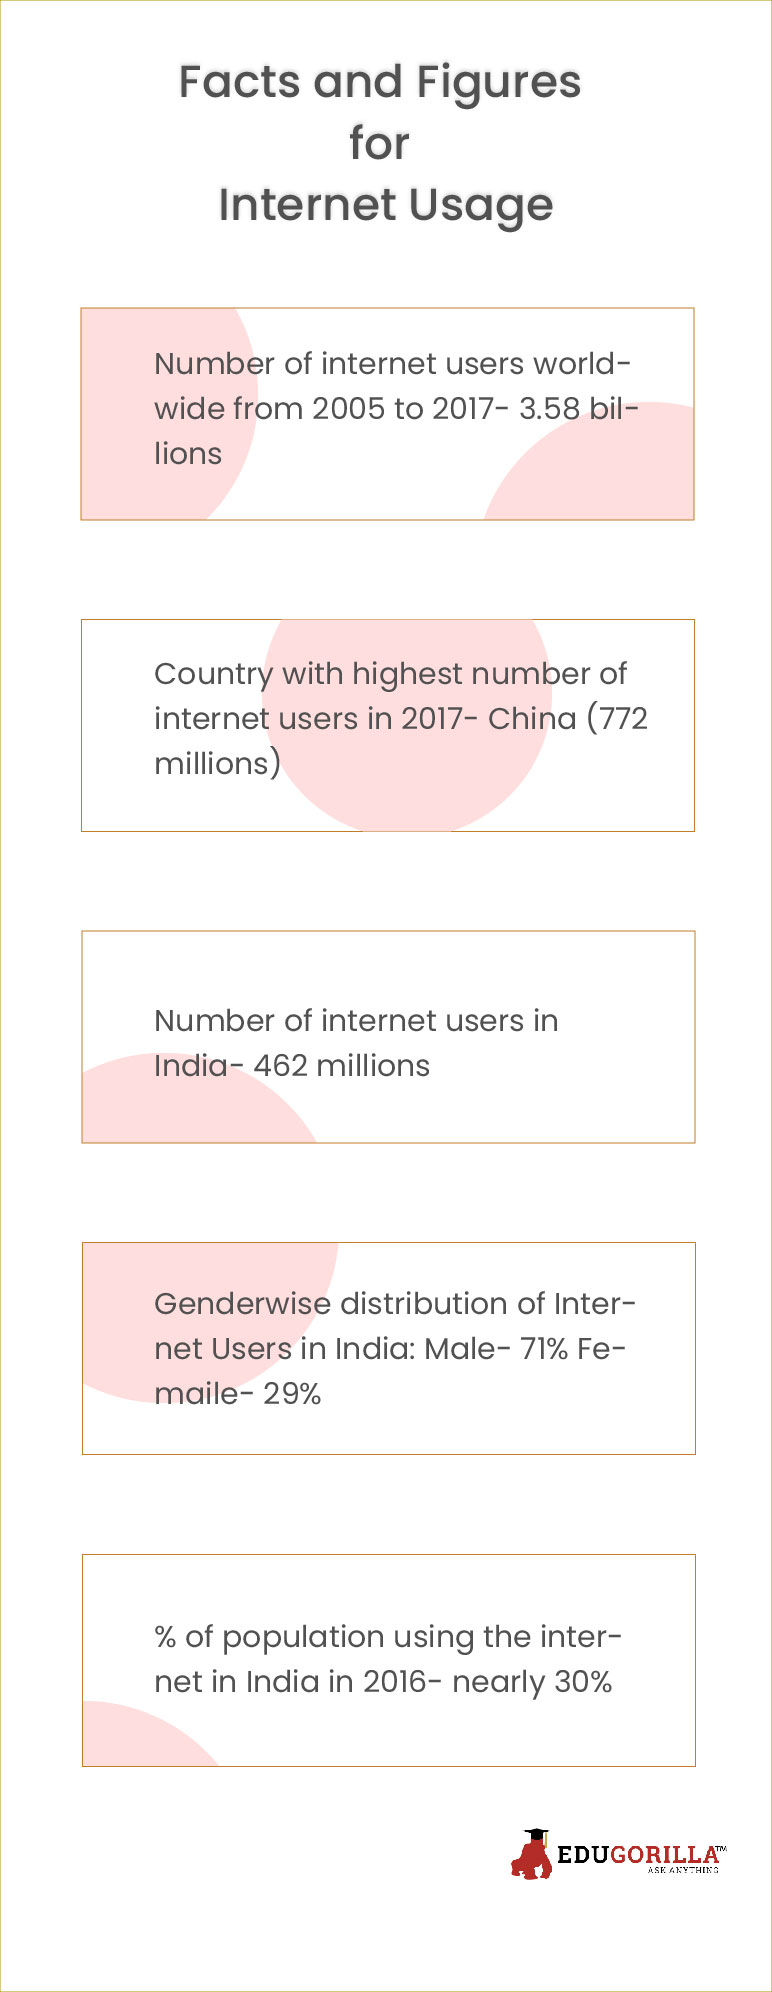 Facts and Figures for Internet Usage